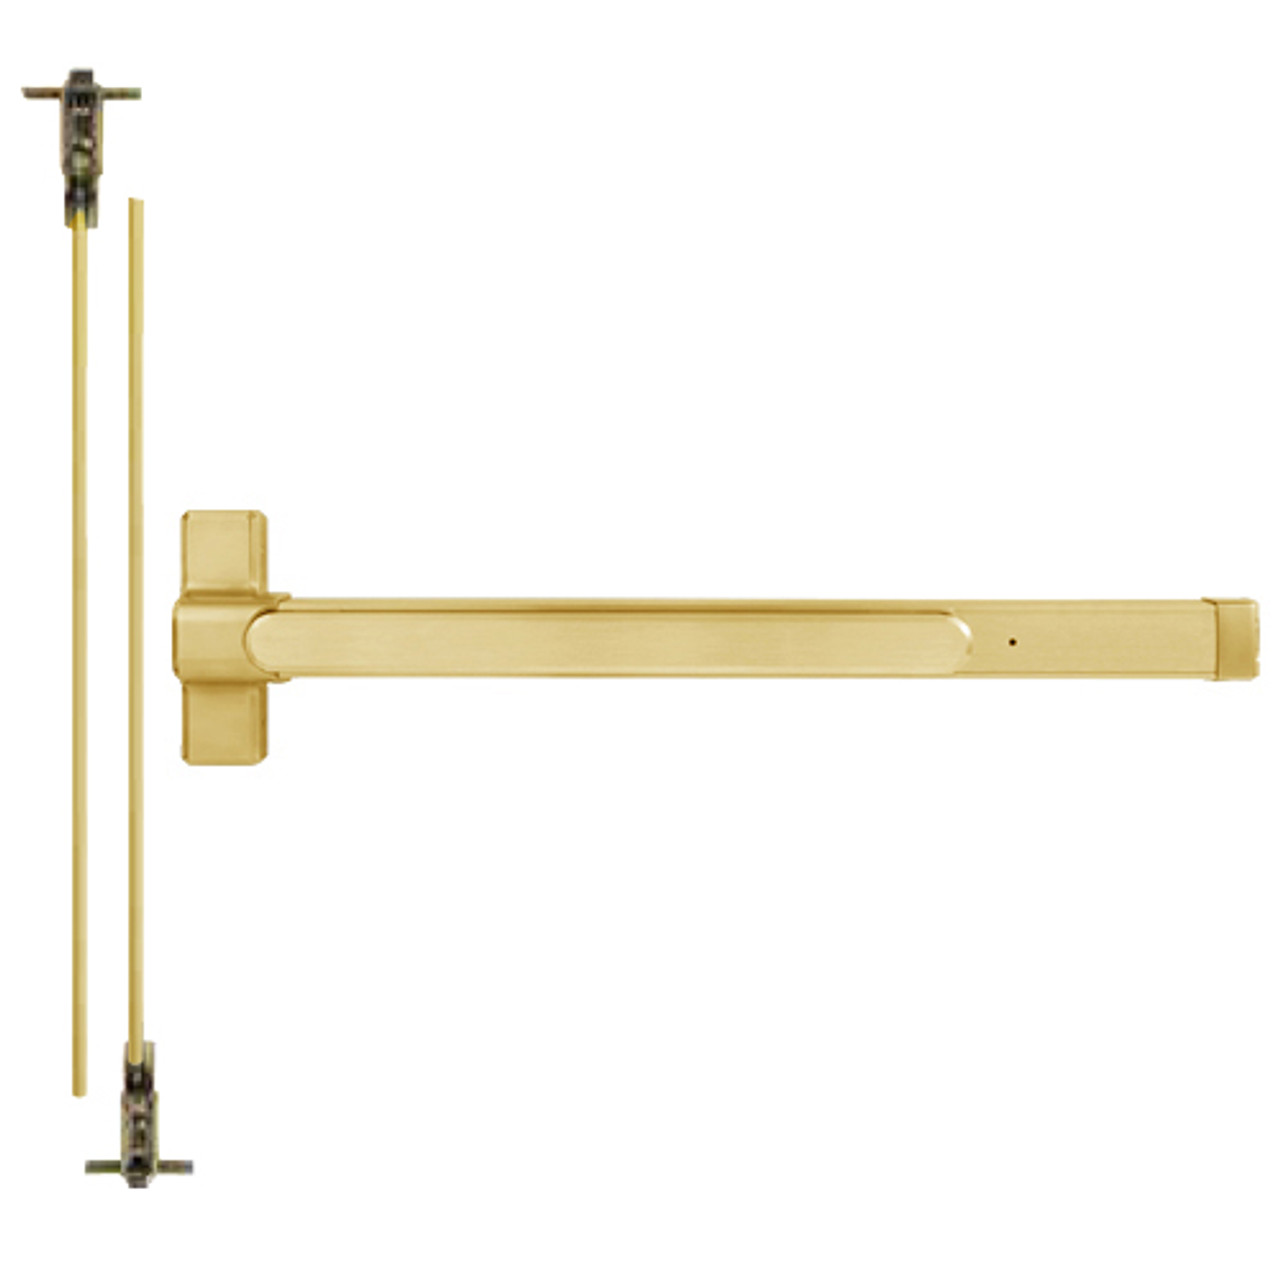 QED124LR-48-8-605 Stanley QED100 Series Heavy Duty Concealed Vertical Rod Hex Dog Exit Device in Bright Brass Finish